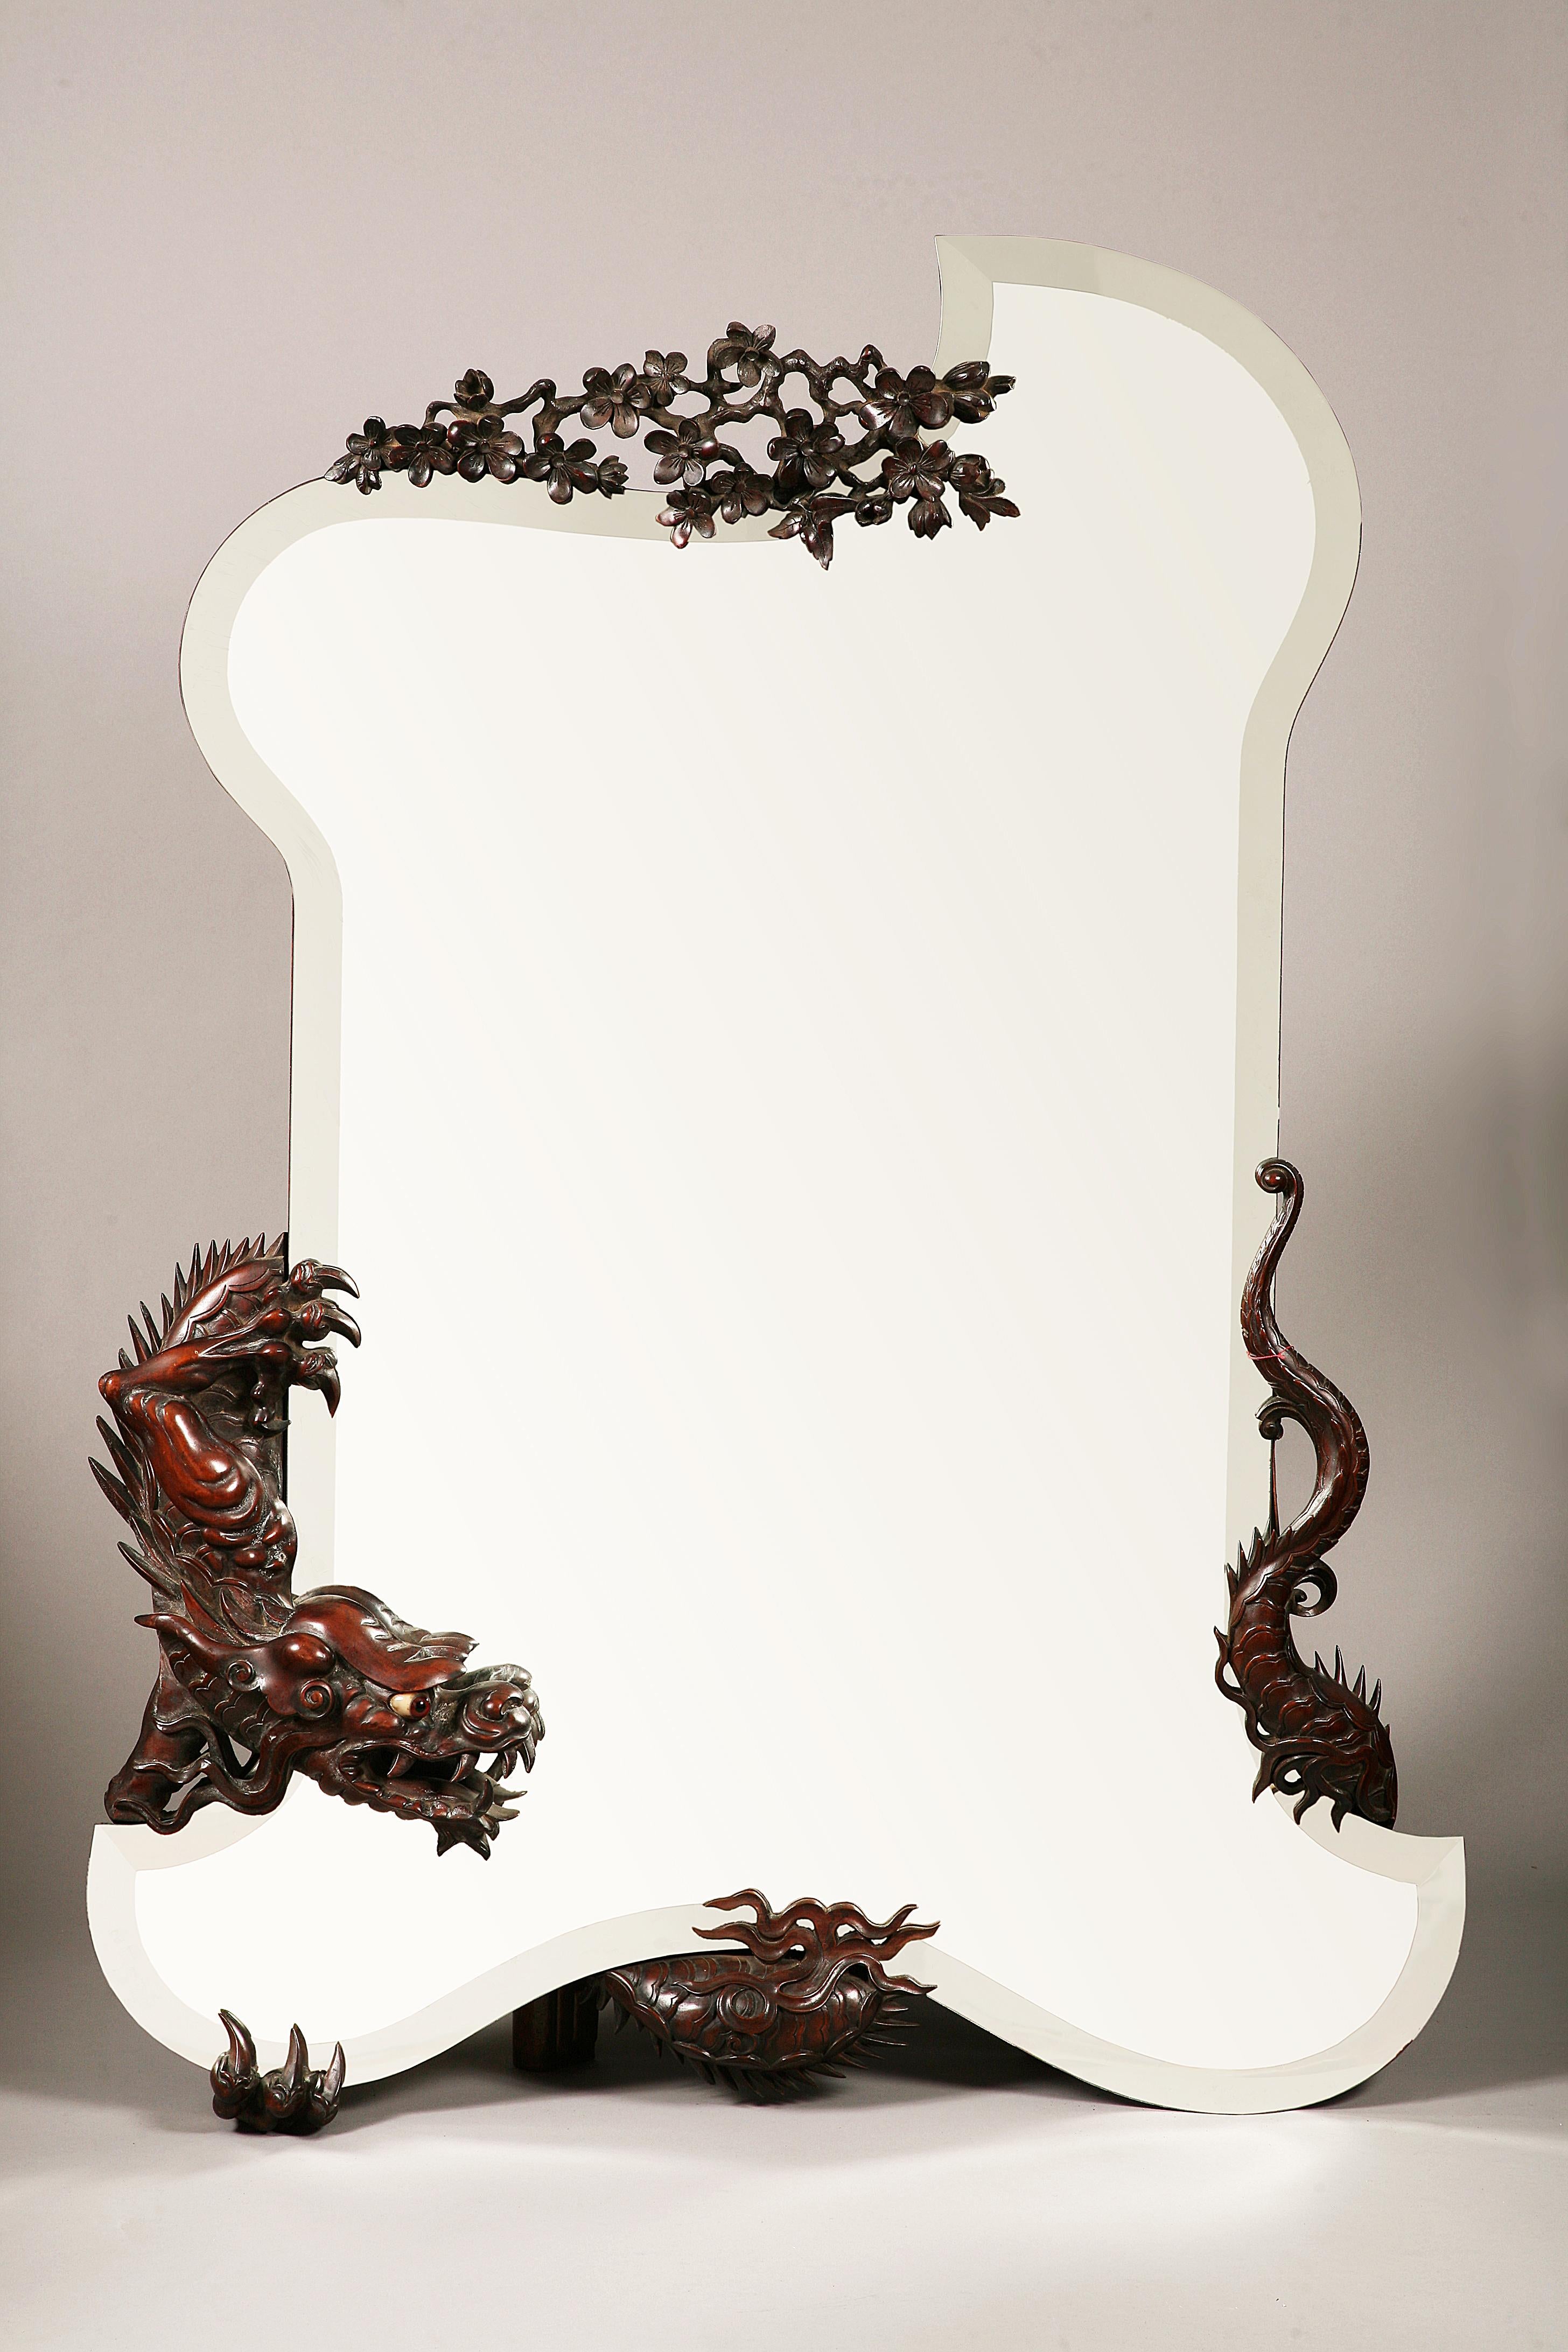 A large Japanese style beveled mirror attributed to G. Viardot, of asymmetrical shape, decorated with a carved tinted wood dragon, wrapped around it. Surmounted by a carved wood Japanese blossoming cherry tree branch.

This mirror is to be linked to